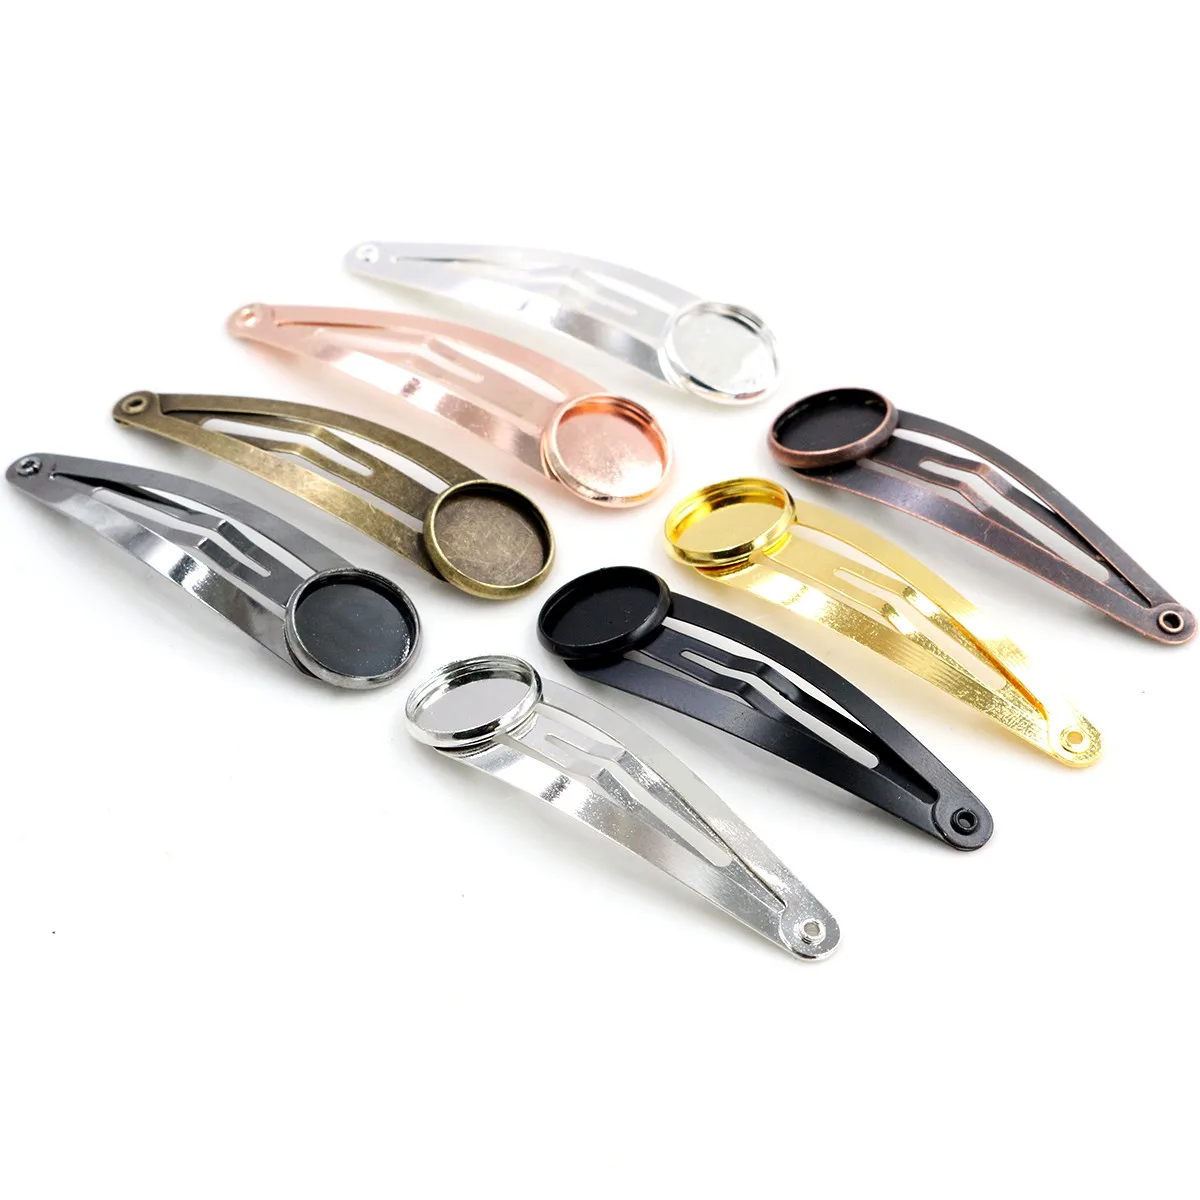 

10pcs/lot 12mm High Quality Classic Hairpin Clips Base Settings Copper Material Cabochon Cameo Blank Base DIY Jewelry Findings, Multi-colors